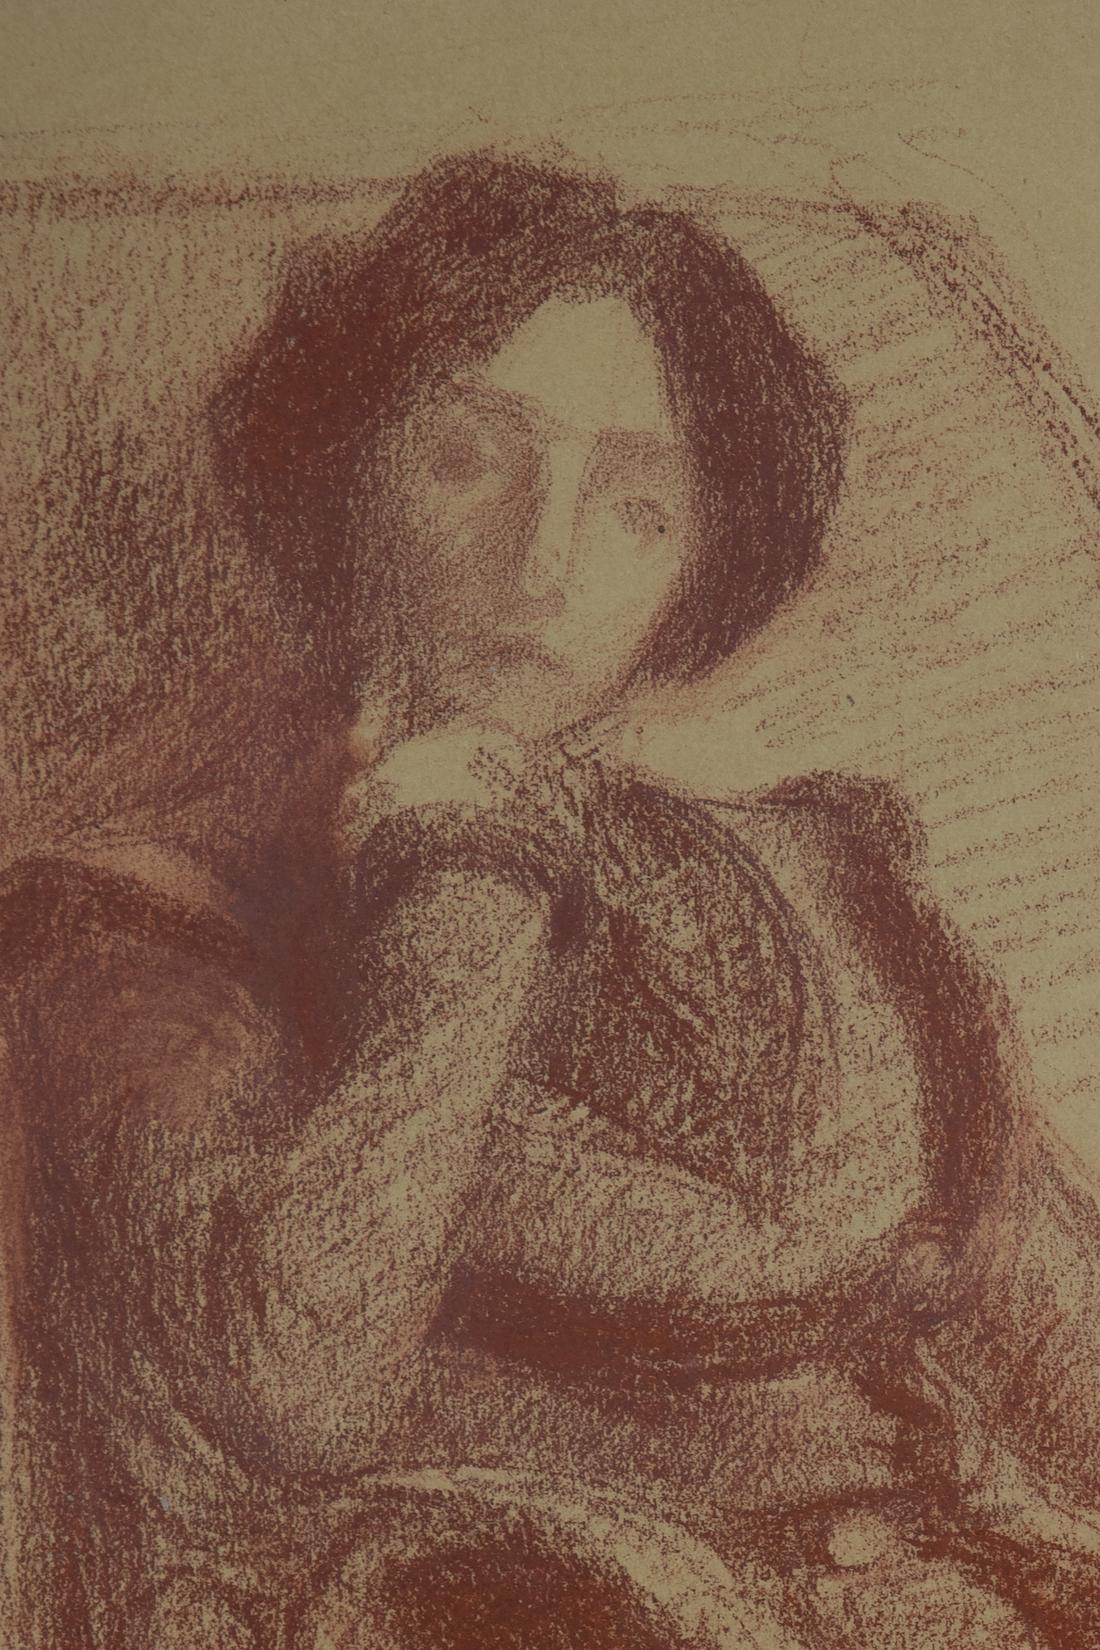 Madame Petitjean Assise, 19 mai 1901 by Hippolyte Petitjean (1854-1929)
Sanguine on paper
52.8 x 38.6 cm (20 ³/₄ x 15 ¹/₄ inches)
Studio stamp and dated lower left, 19 mai 1901
Executed in 1901

Provenance
JPL Fine Arts, London

Exhibition
Monte